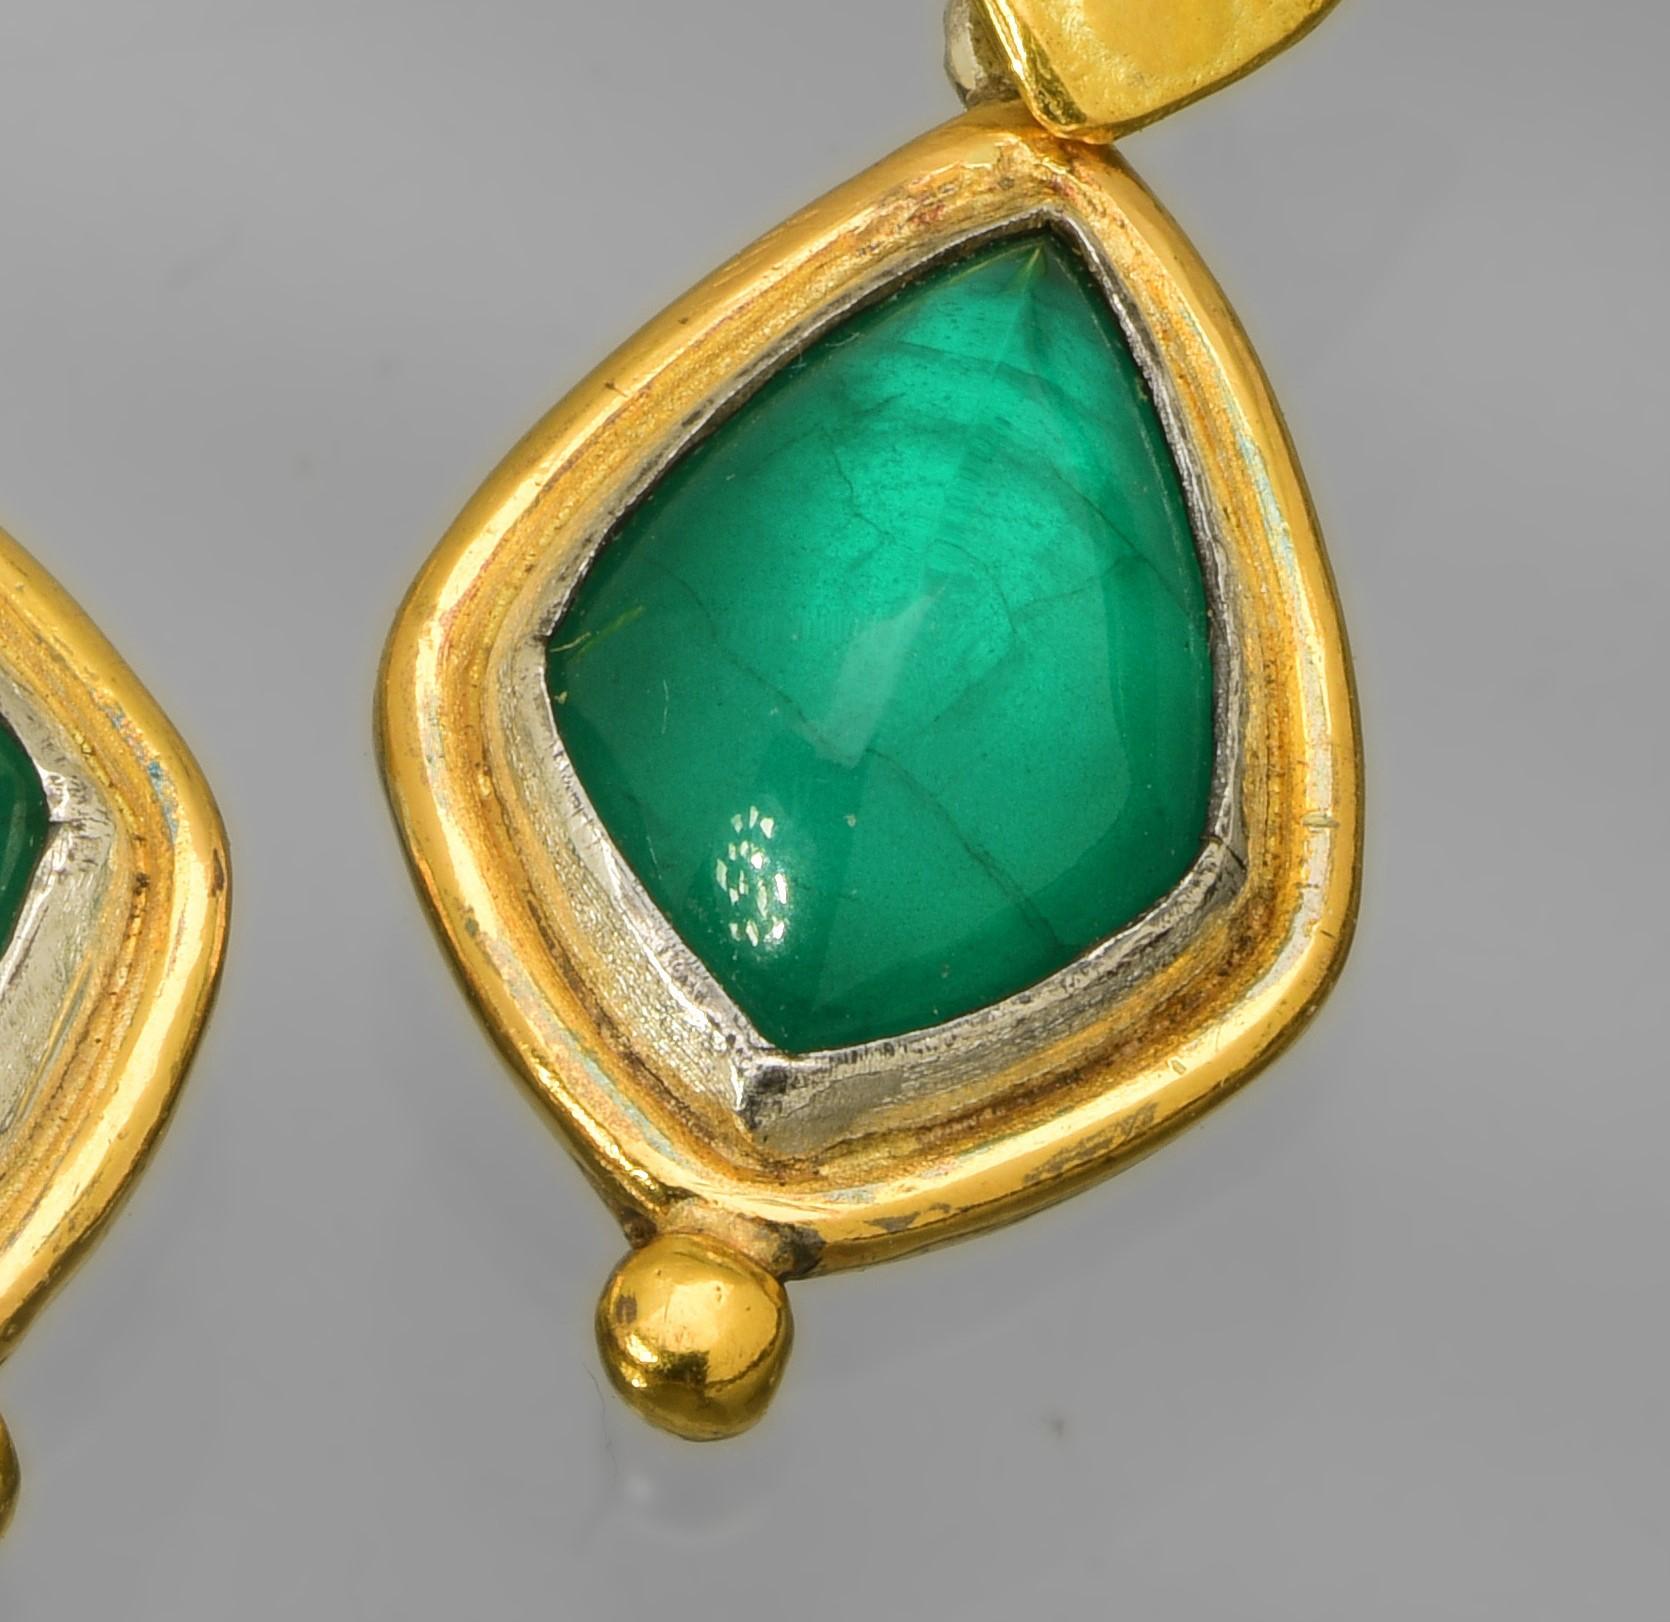 Cabochon Emerald Earrings with 22 Karat Yellow Gold and Silver